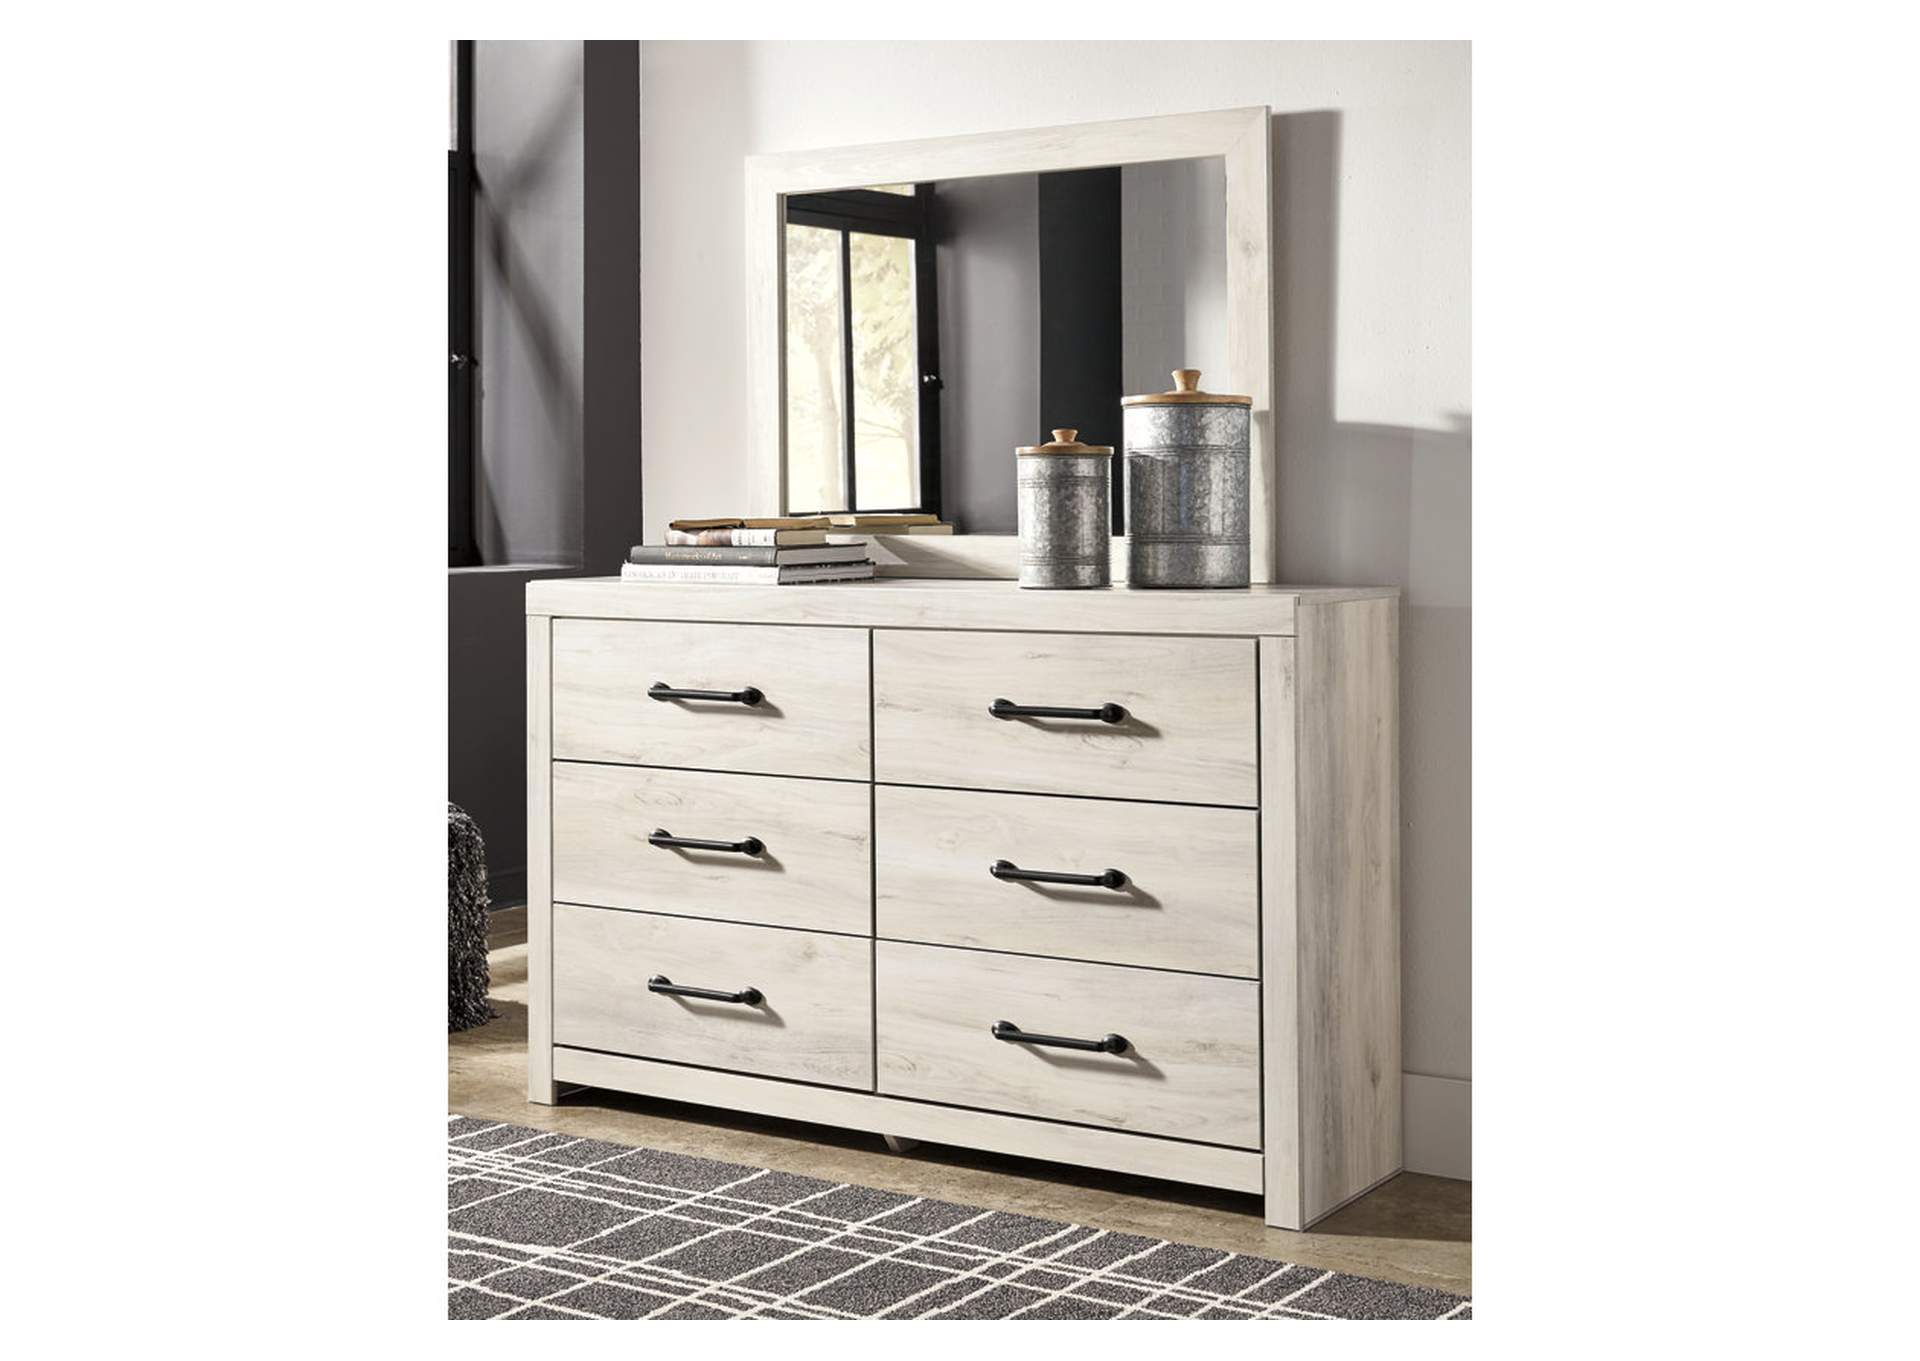 Cambeck Queen Panel Bed, Dresser, Mirror and Nightstand,Signature Design By Ashley